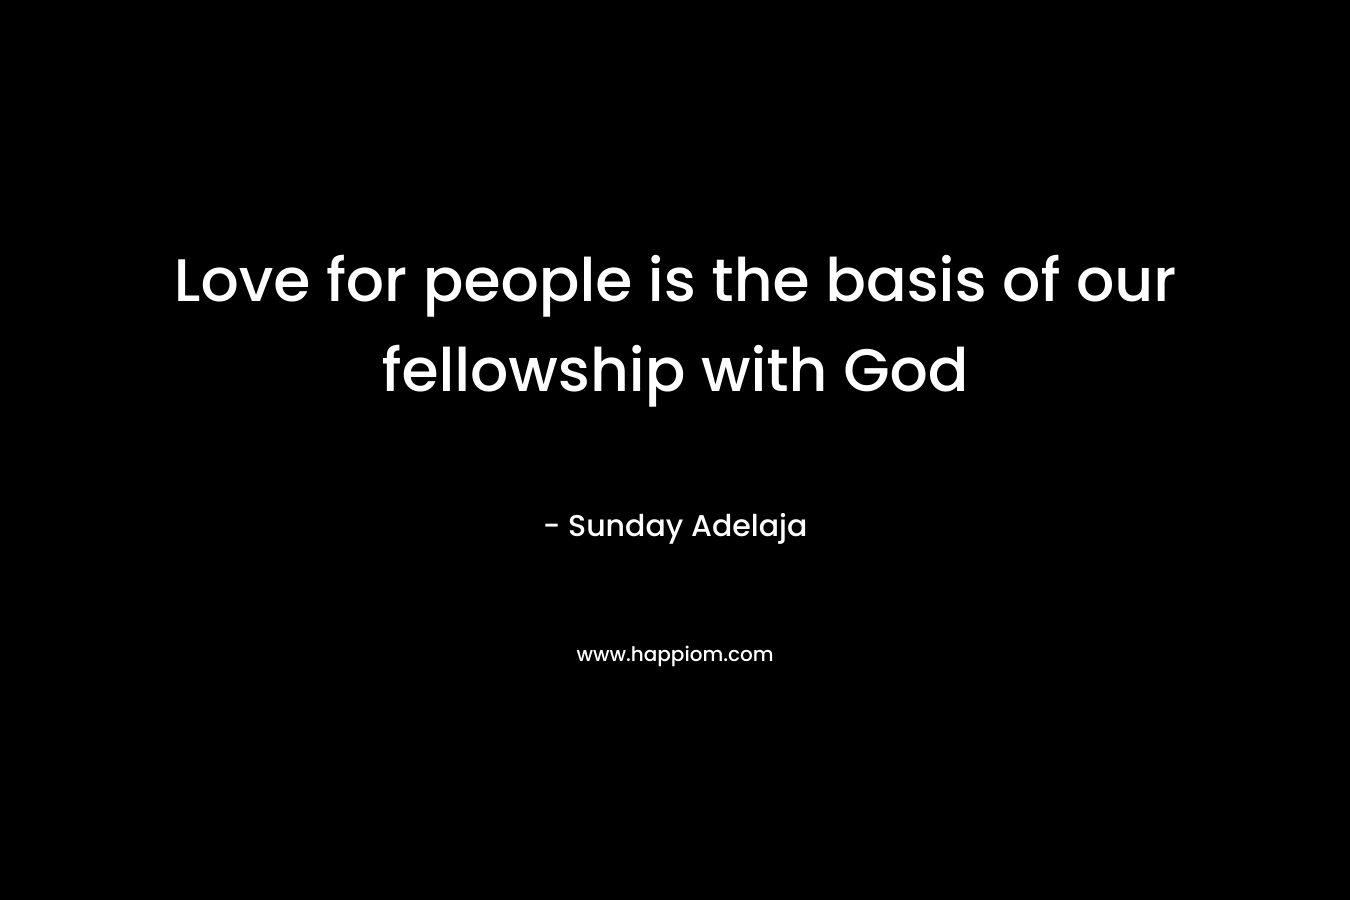 Love for people is the basis of our fellowship with God